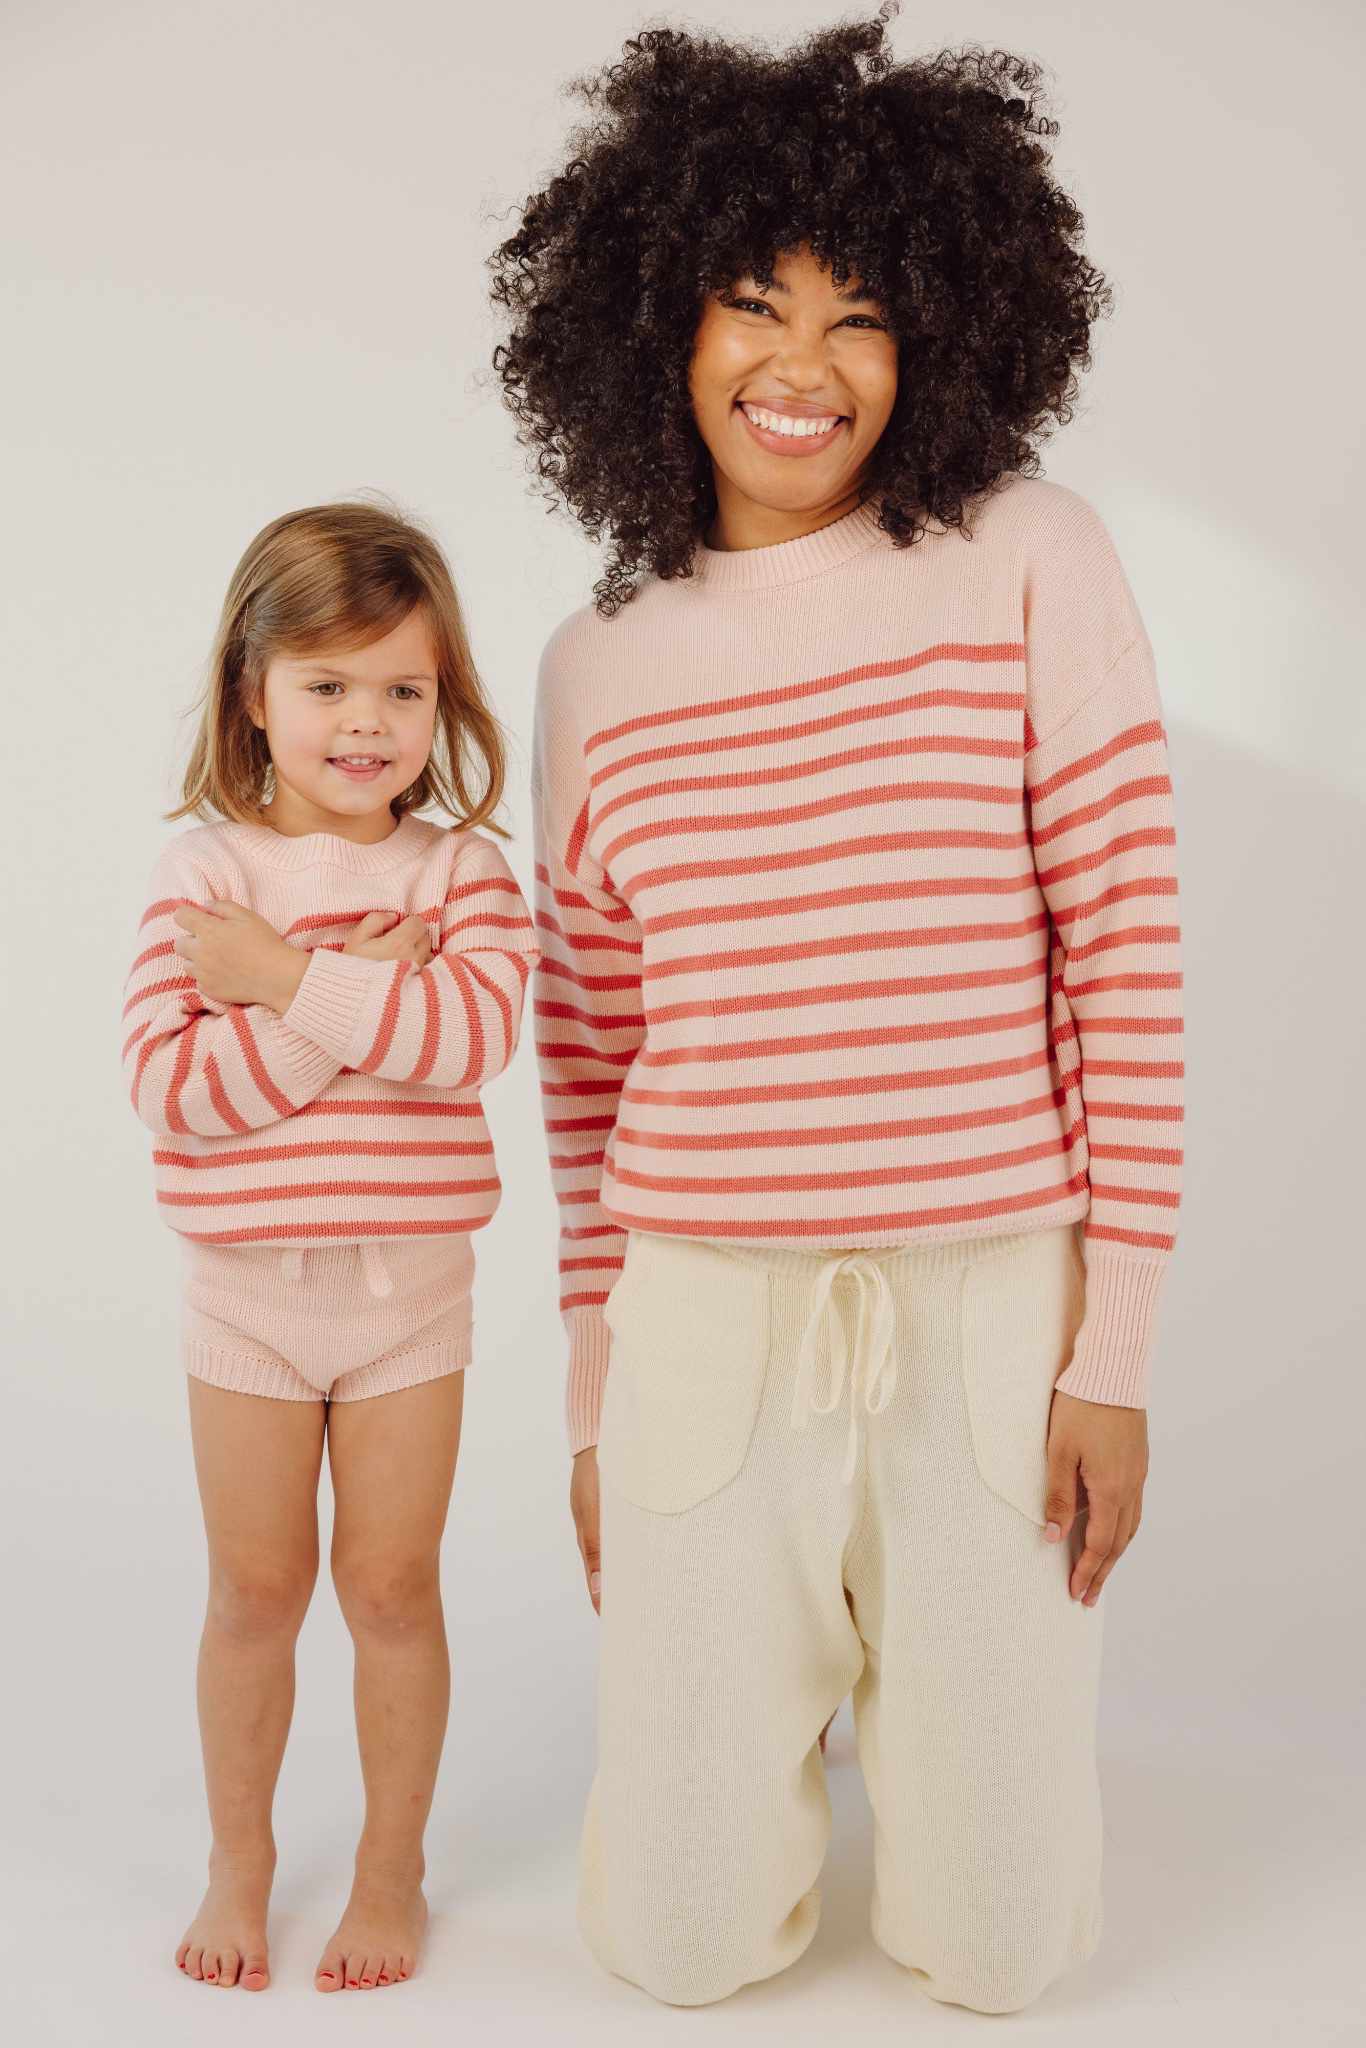 Minnow unisex pink and dusty red stripe knit sweater $75.00 https://minnowswim.com/collections/new-arrivals-for-girls/products/unisex-pink-and-dusty-red-stripe-knit-sweater